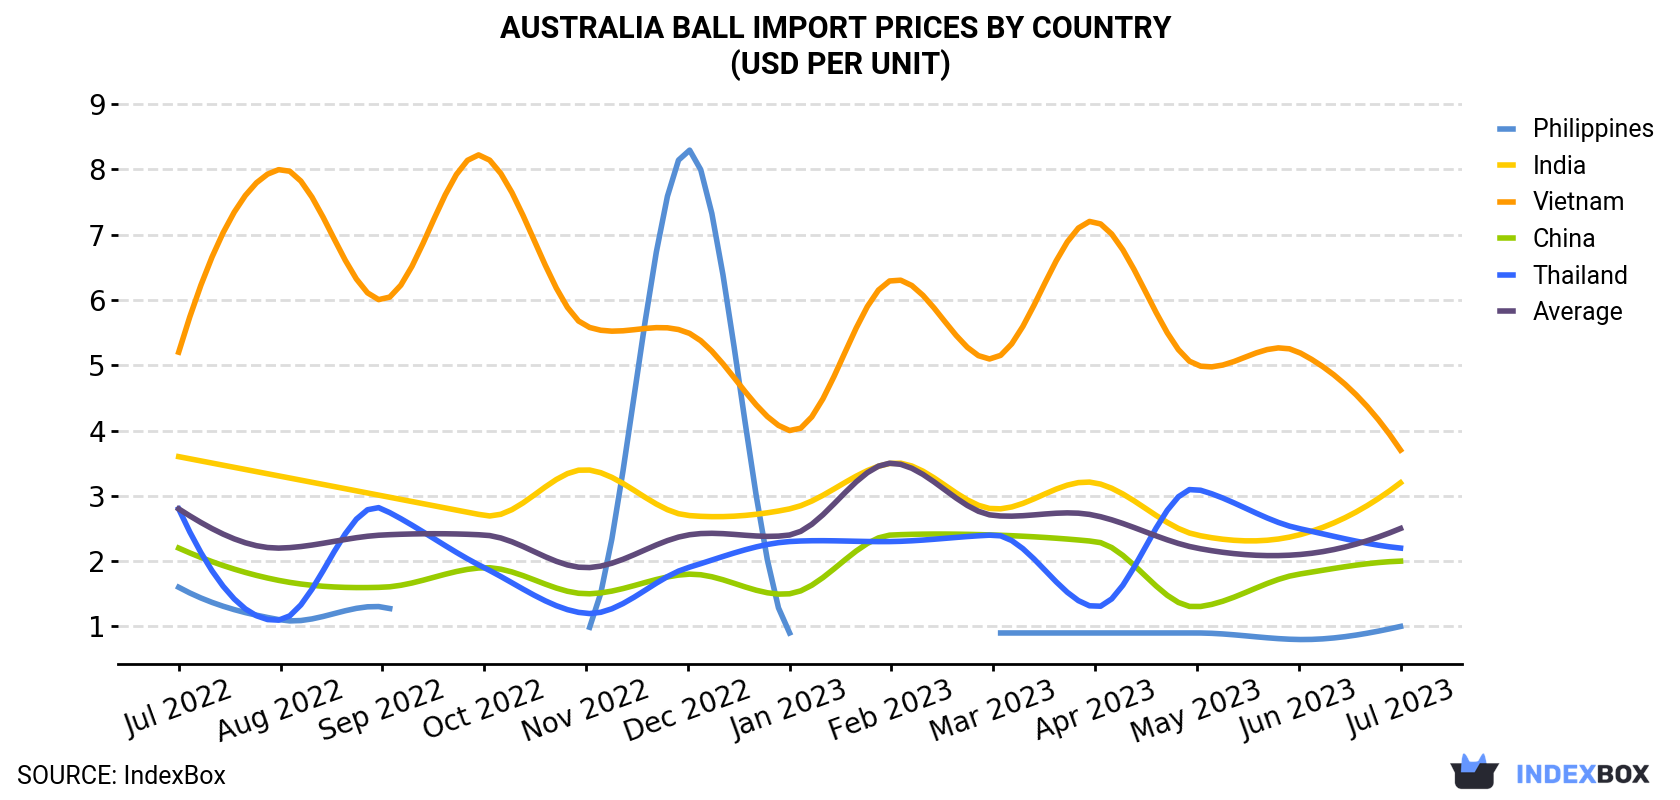 Australia Ball Import Prices By Country (USD Per Unit)